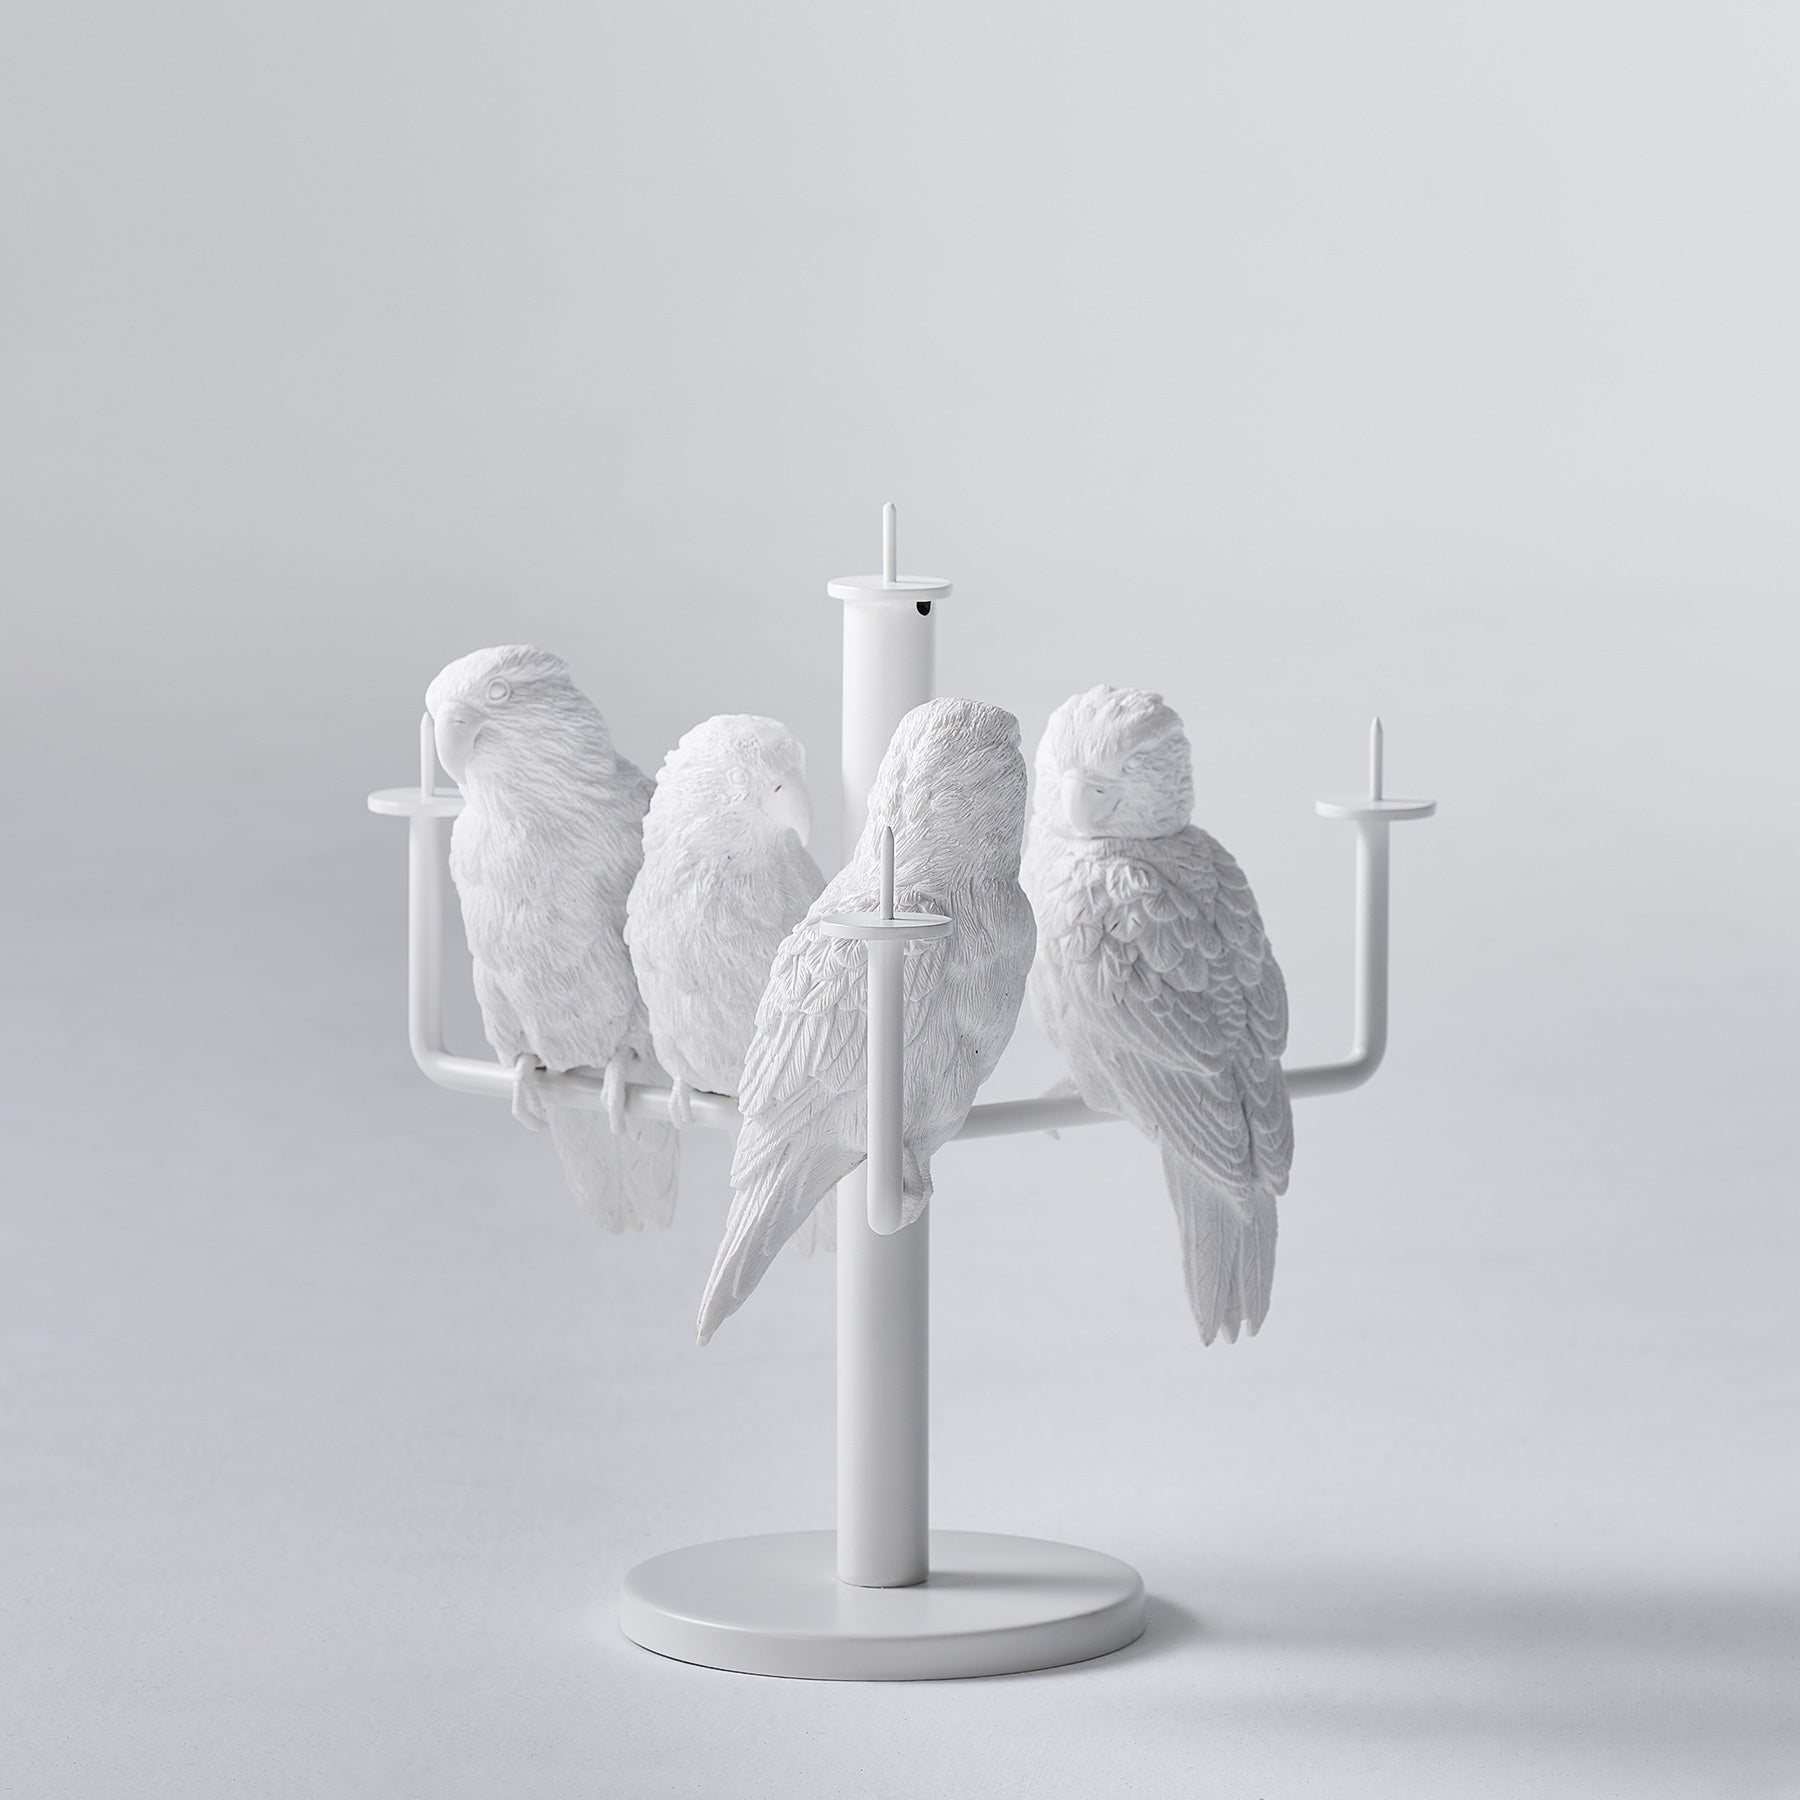 White Candle Holder for 4 Four Candle with Resin Parrot Sculpture for Home Decor Accessories Invite Parrots to Chat or Dinner in Peace & Naturality